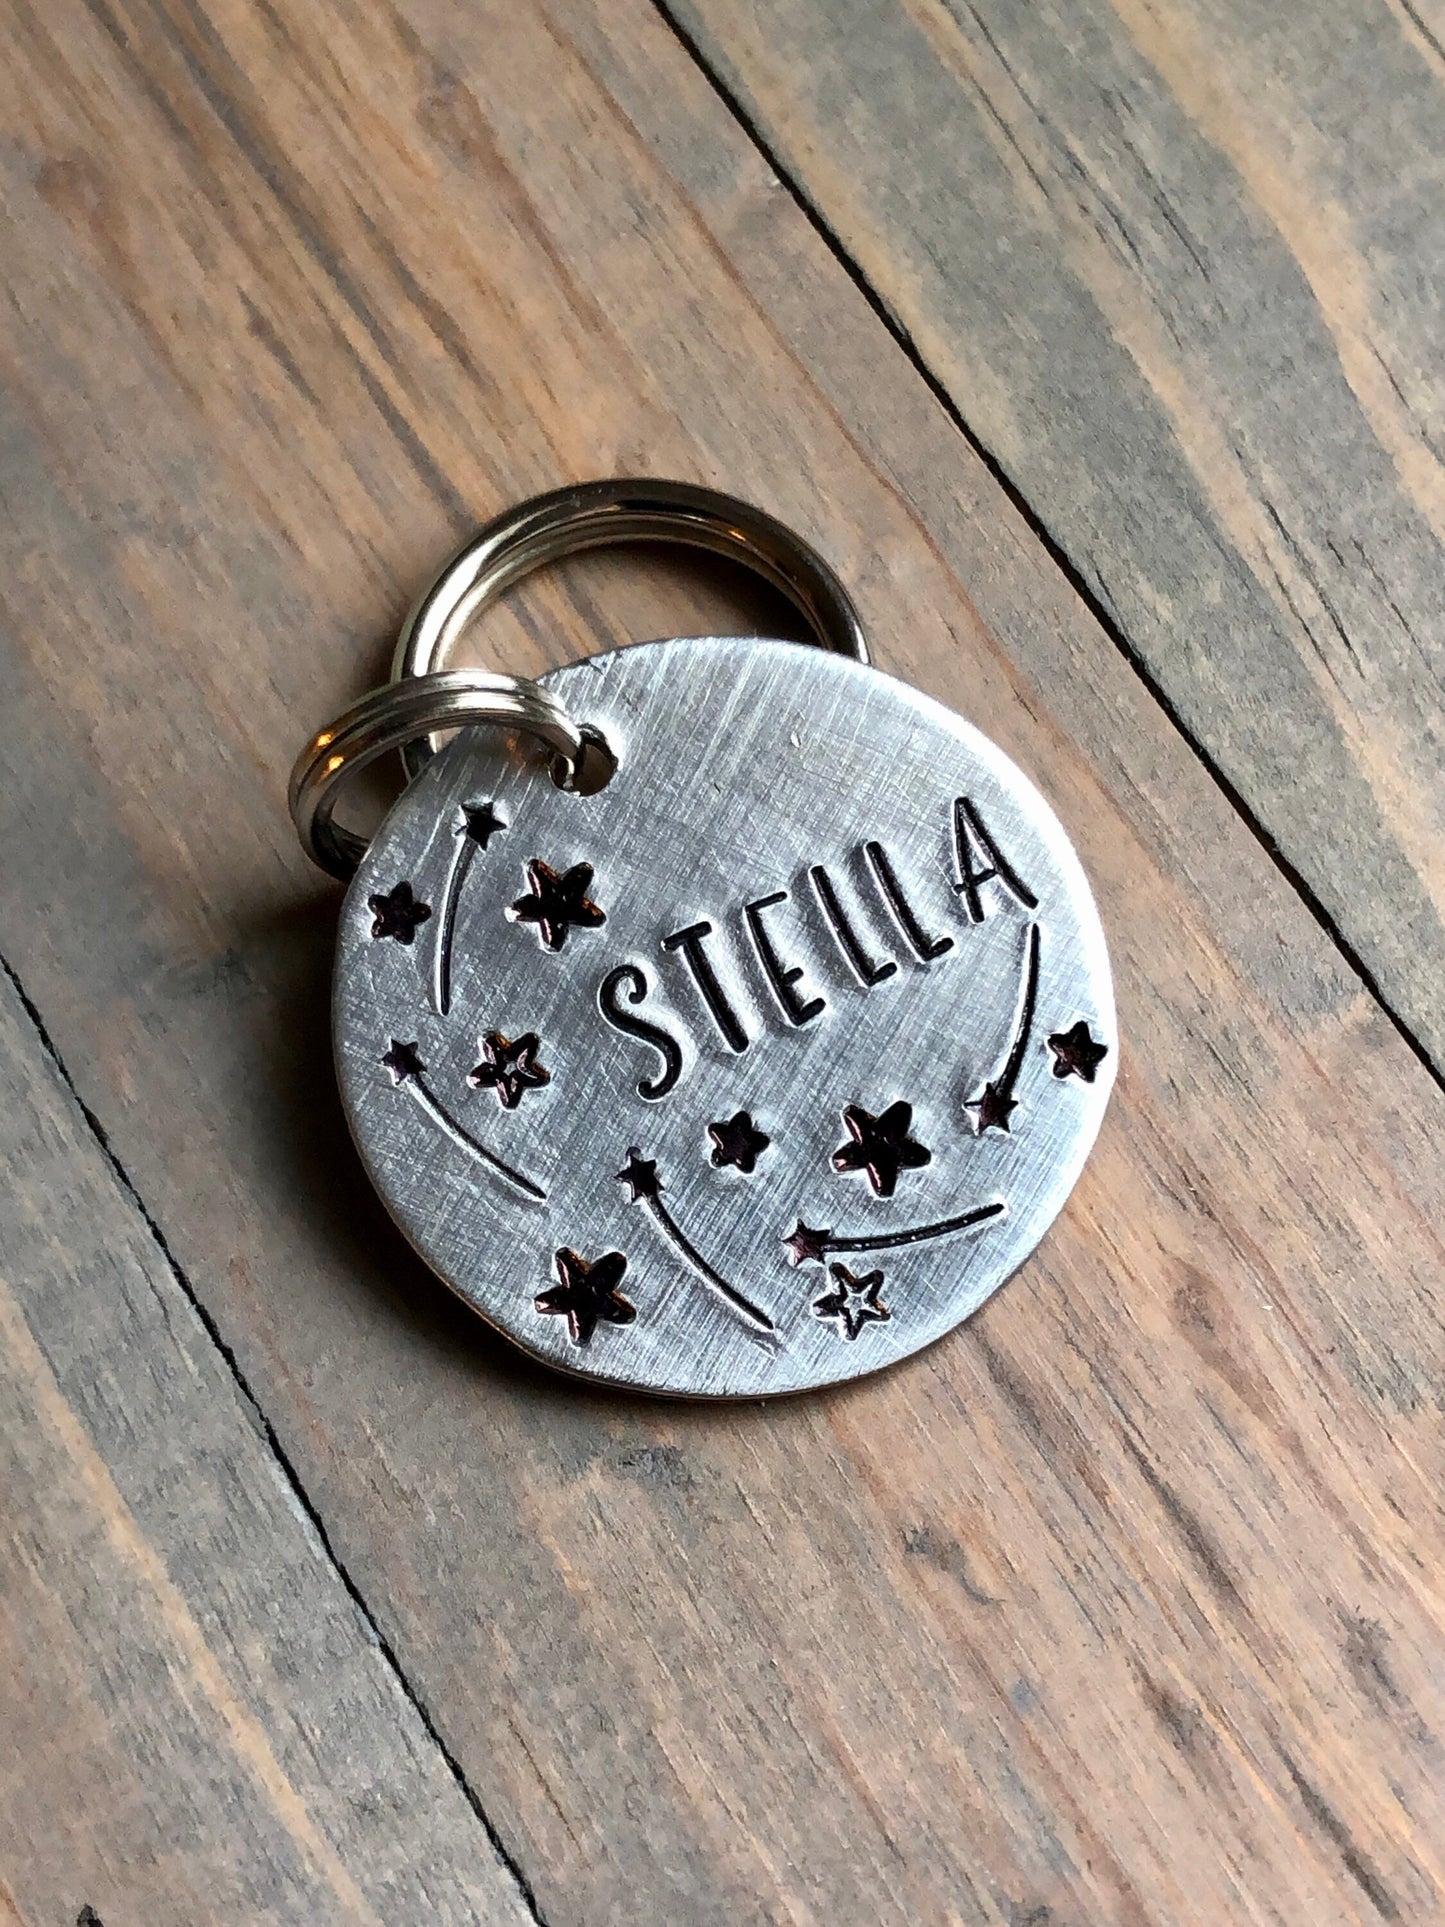 Dog Tag with Stars, Stella, Pet Id Tag with Night Sky, Dog Tag with Shooting Stars, Milky Way Pet Tag for Collar